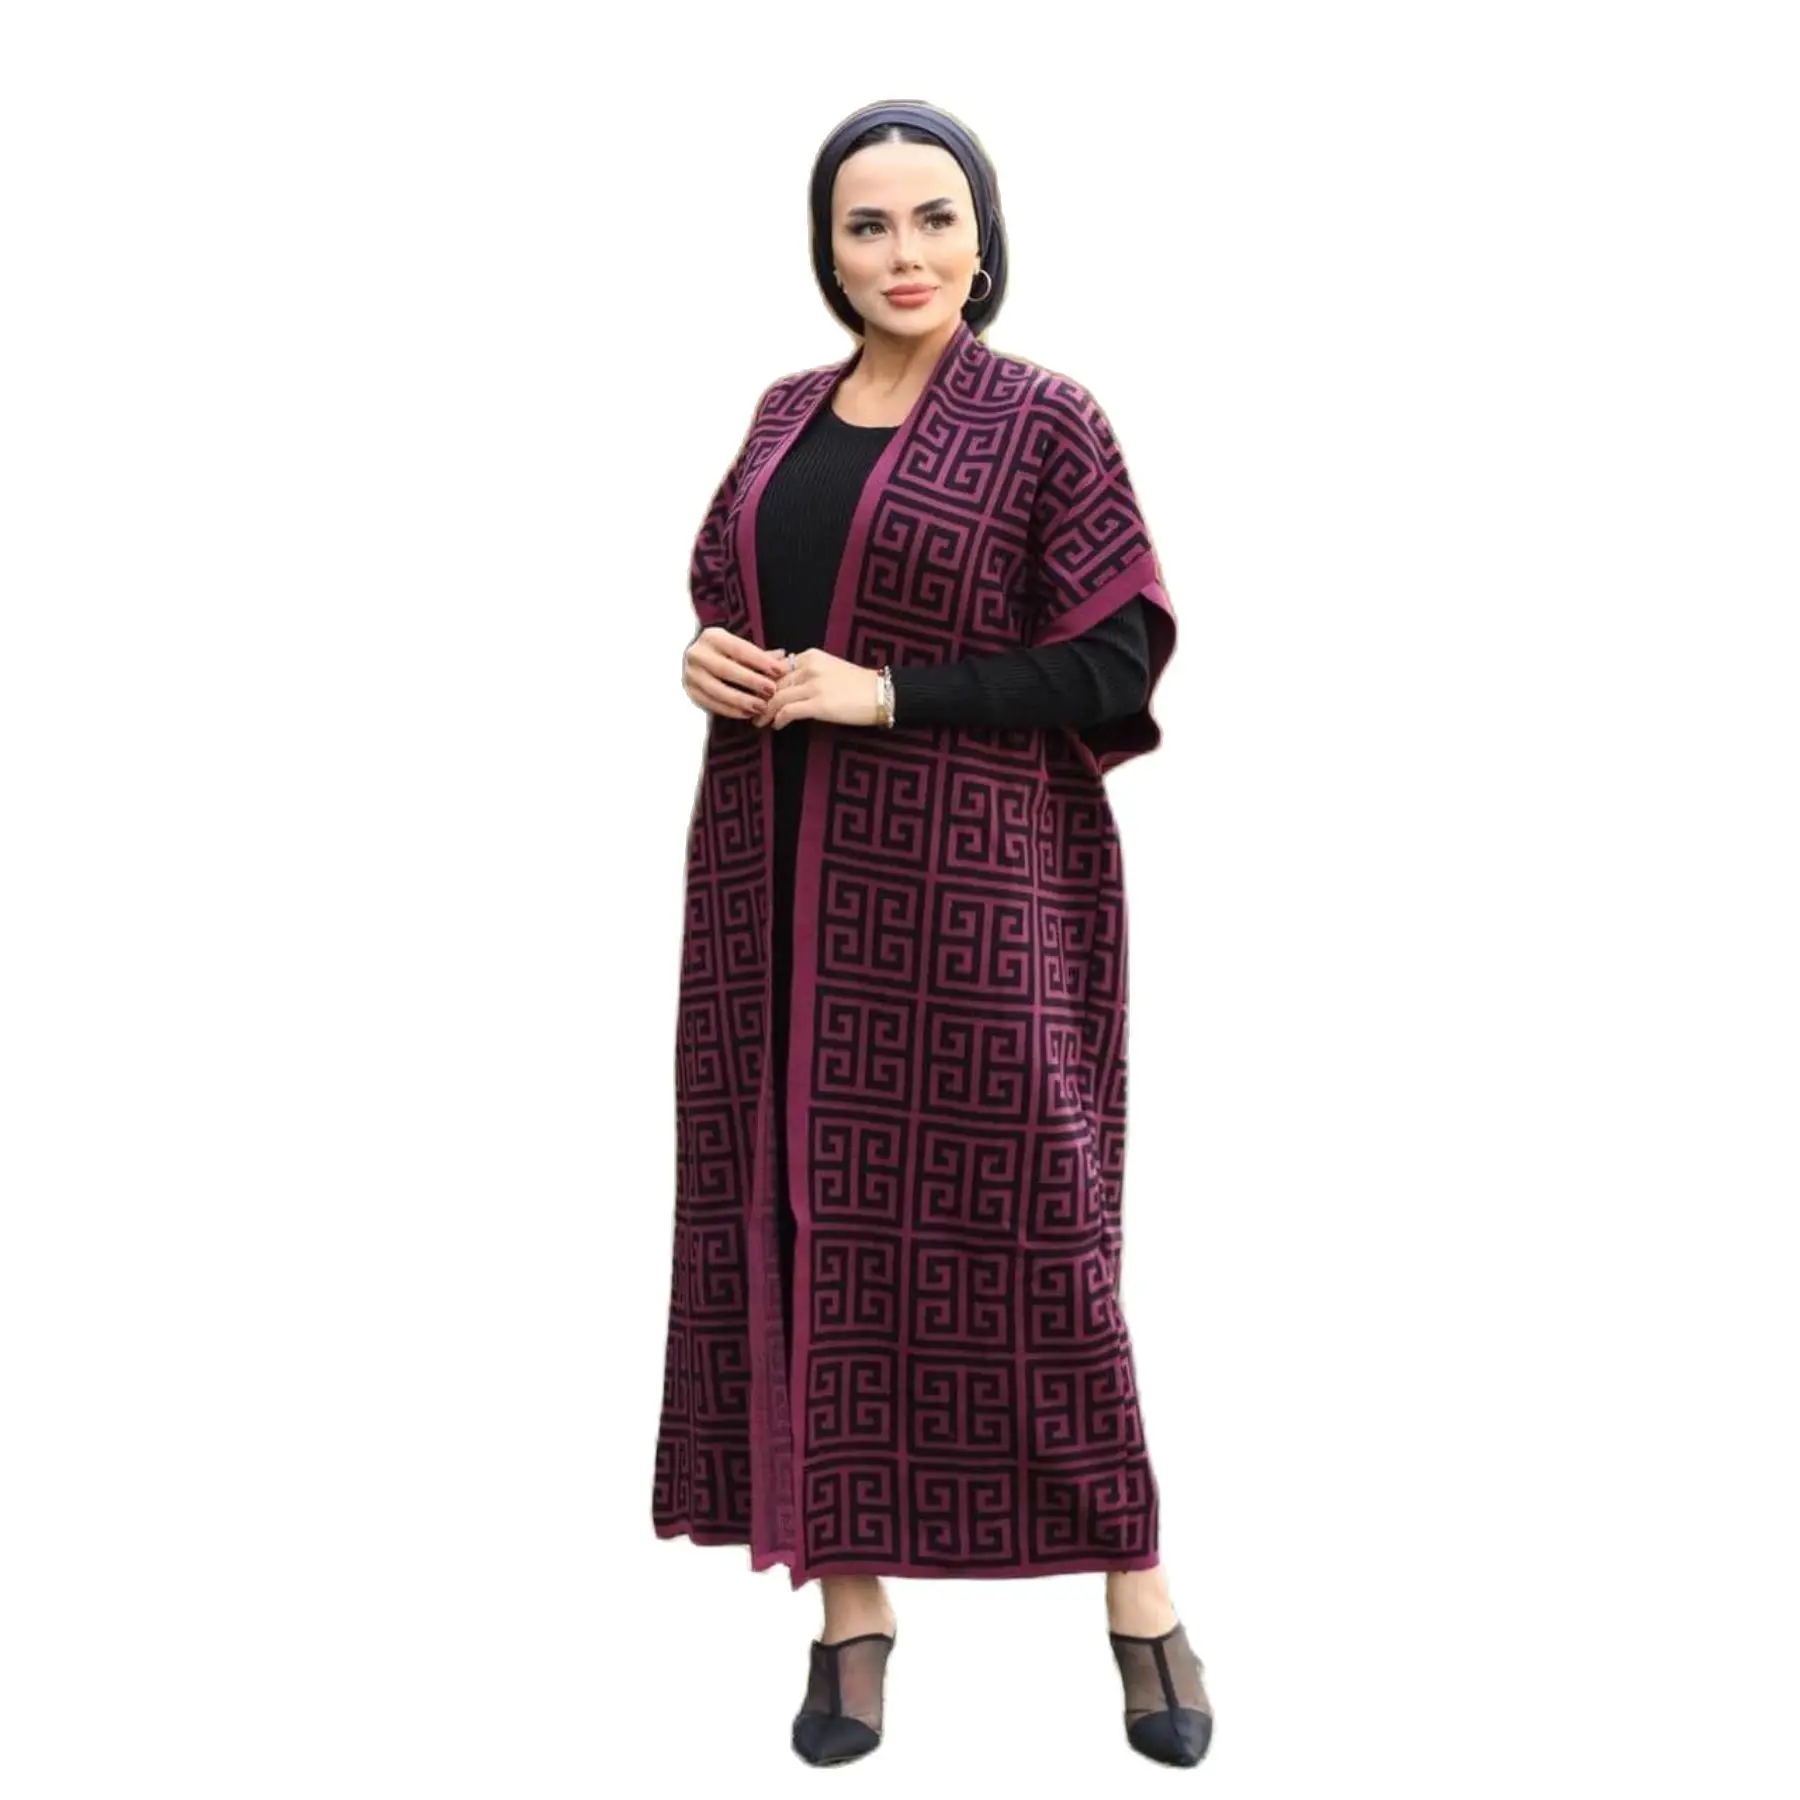 2 Piece Women's Knitted Set Maxi Embroidery Dress and Patterned Bat Wing...